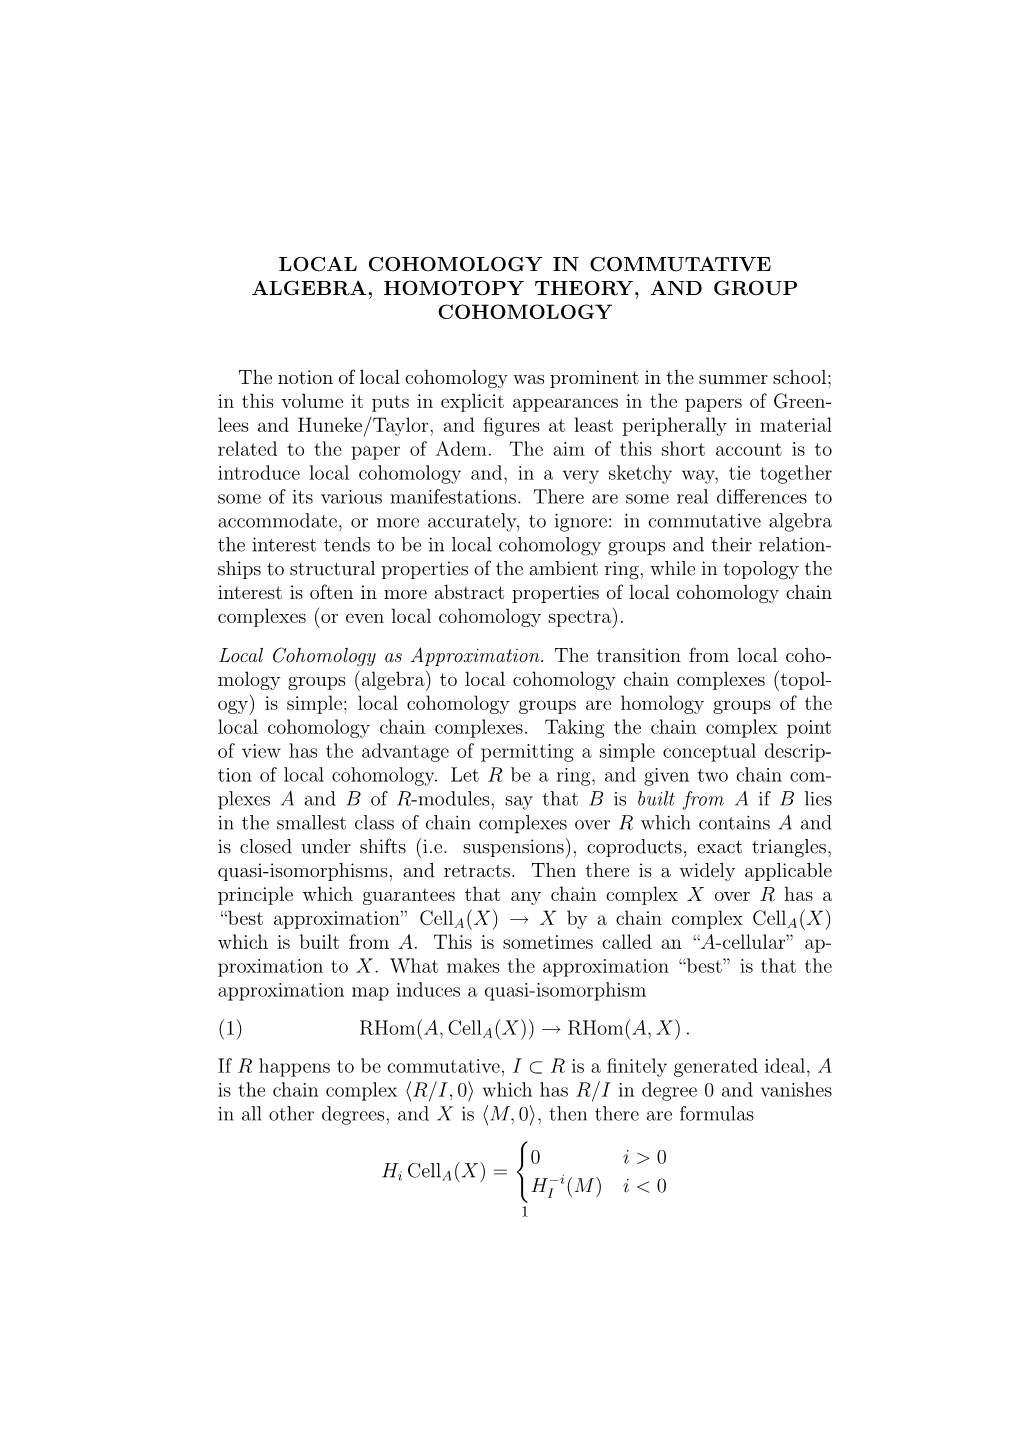 Local Cohomology in Commutative Algebra, Homotopy Theory, and Group Cohomology